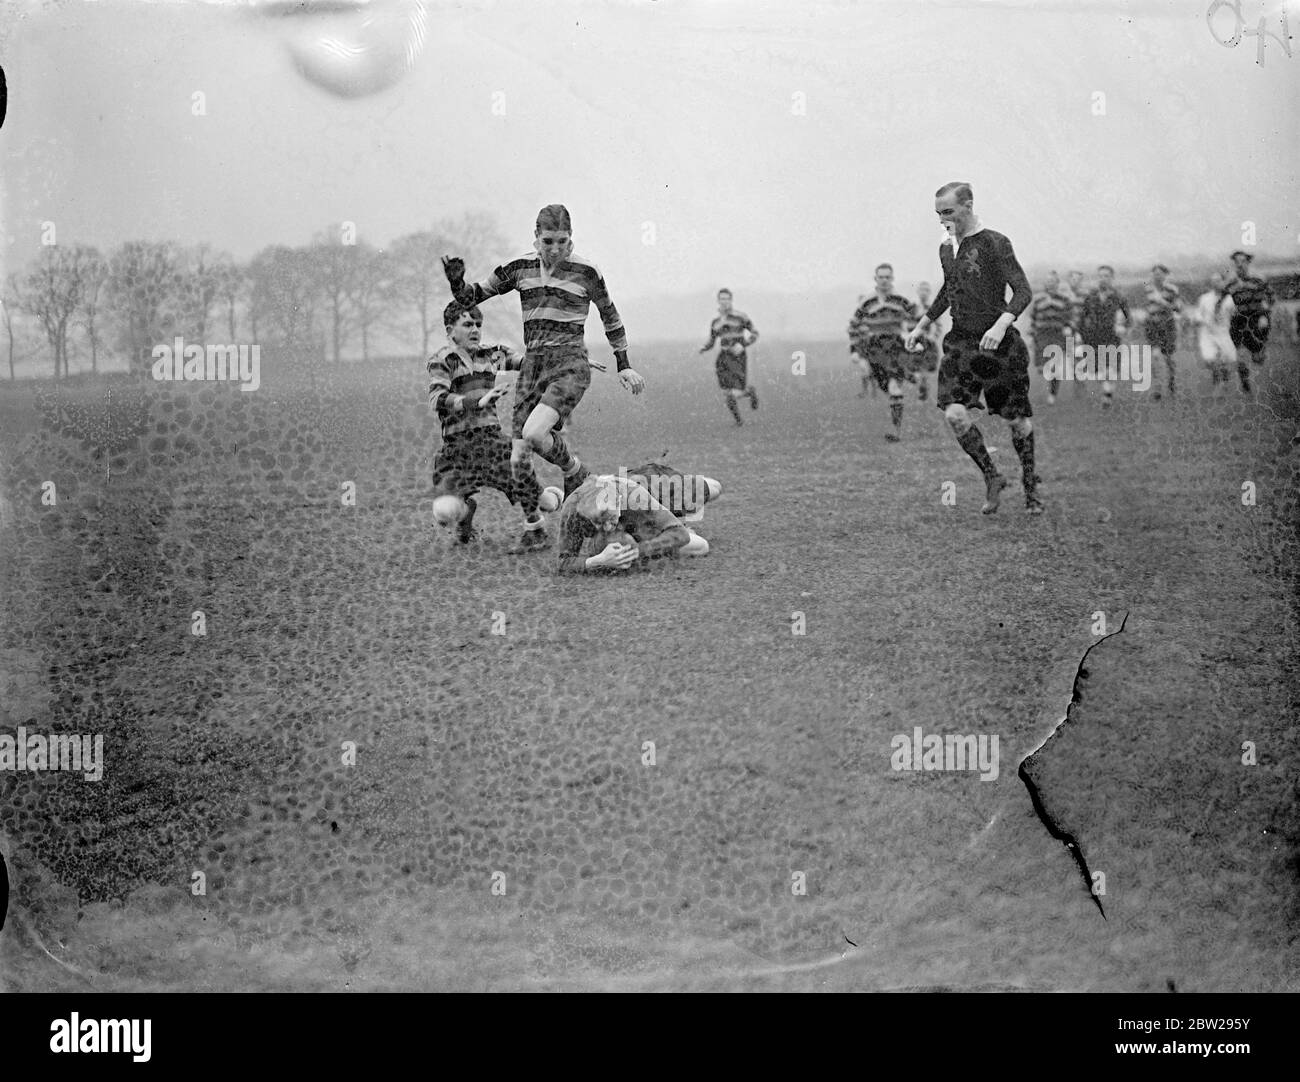 England versus Scotland in public schools rugby match. English public school boys met Scotland in a rugby match at Richmond athletic ground, Richmond, Surrey Photo Shows, a Scottish player goes down hugging the ball with two English players in close attendance 31 December 1937 Stock Photo